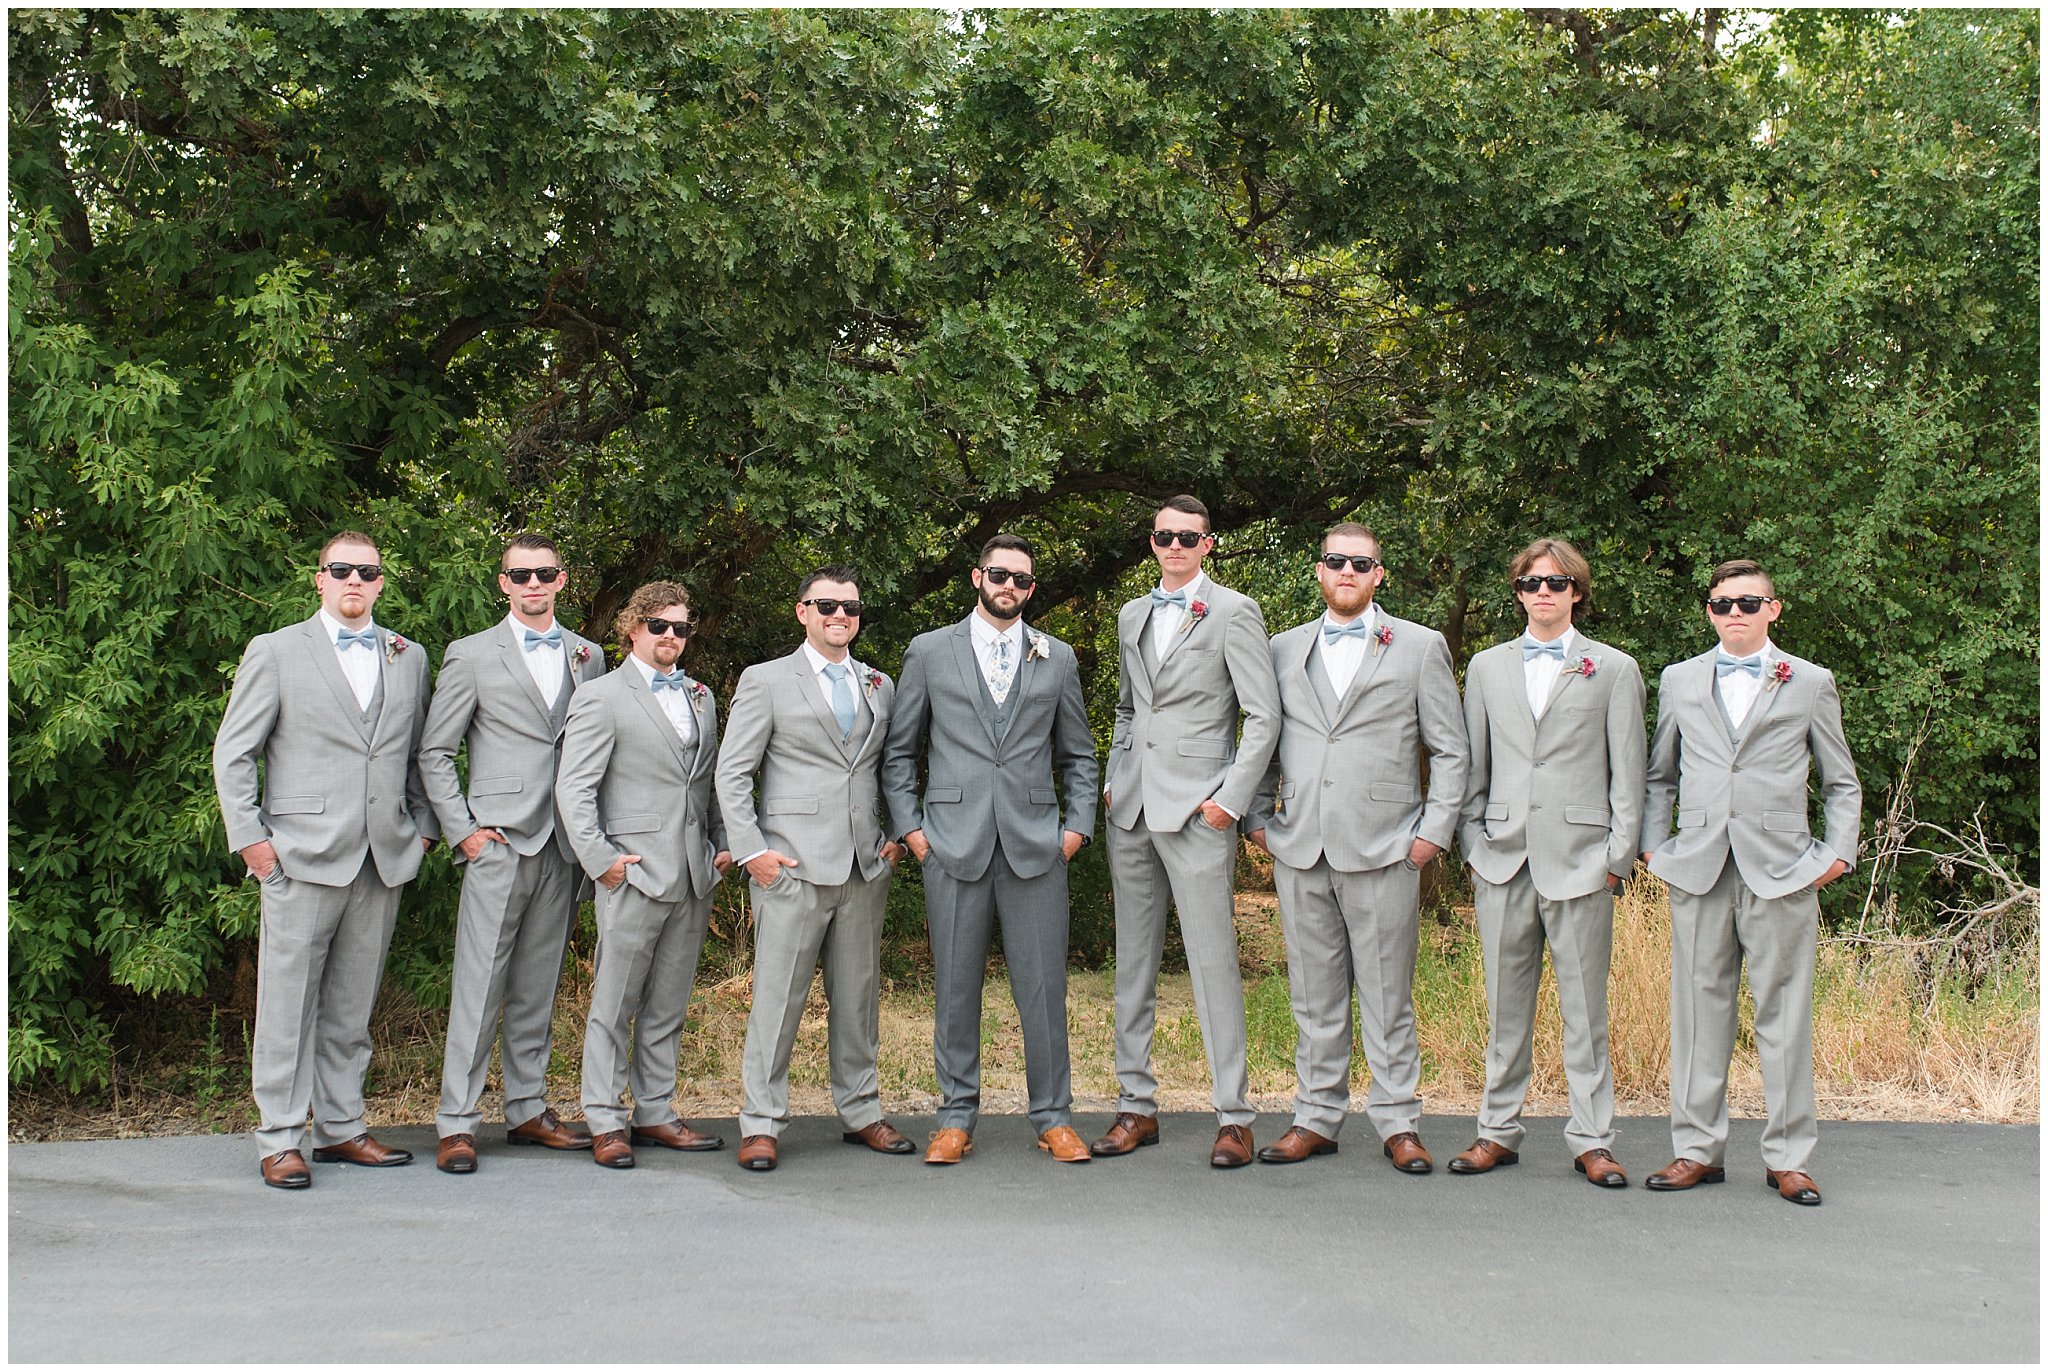 Groom and groomsmen wearing gray suits and blue floral ties with custom sunglasses | Dusty Blue and Rose Summer Wedding at Oak Hills Utah | Jessie and Dallin Photography